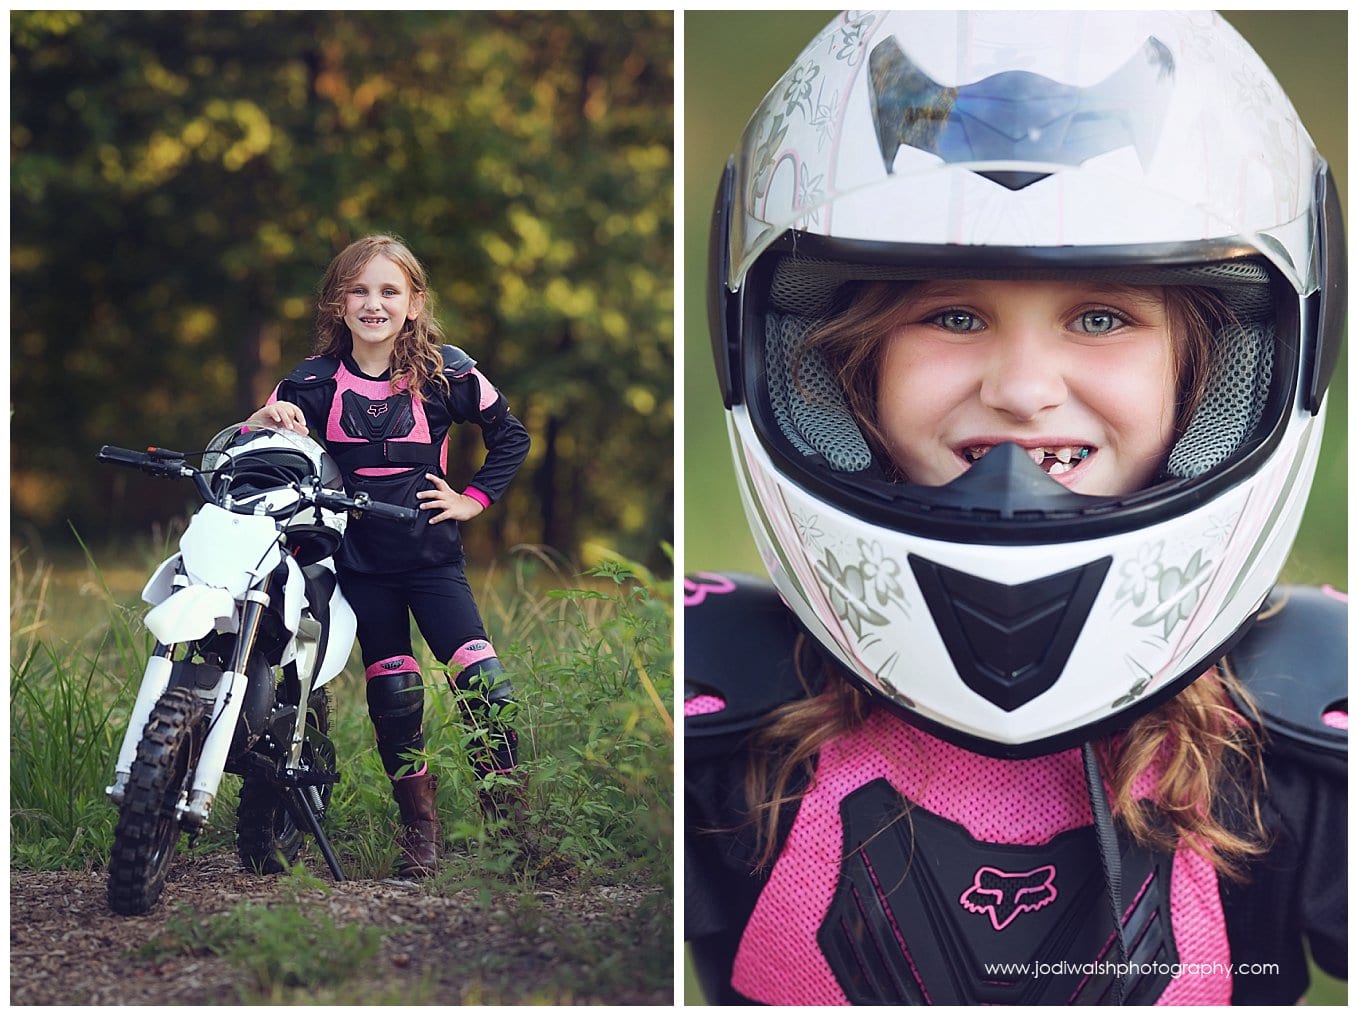 images of a little girl wearing black and pink racing gear with her dirt bike in South Park.  She's wearing a white helmet and grinning.